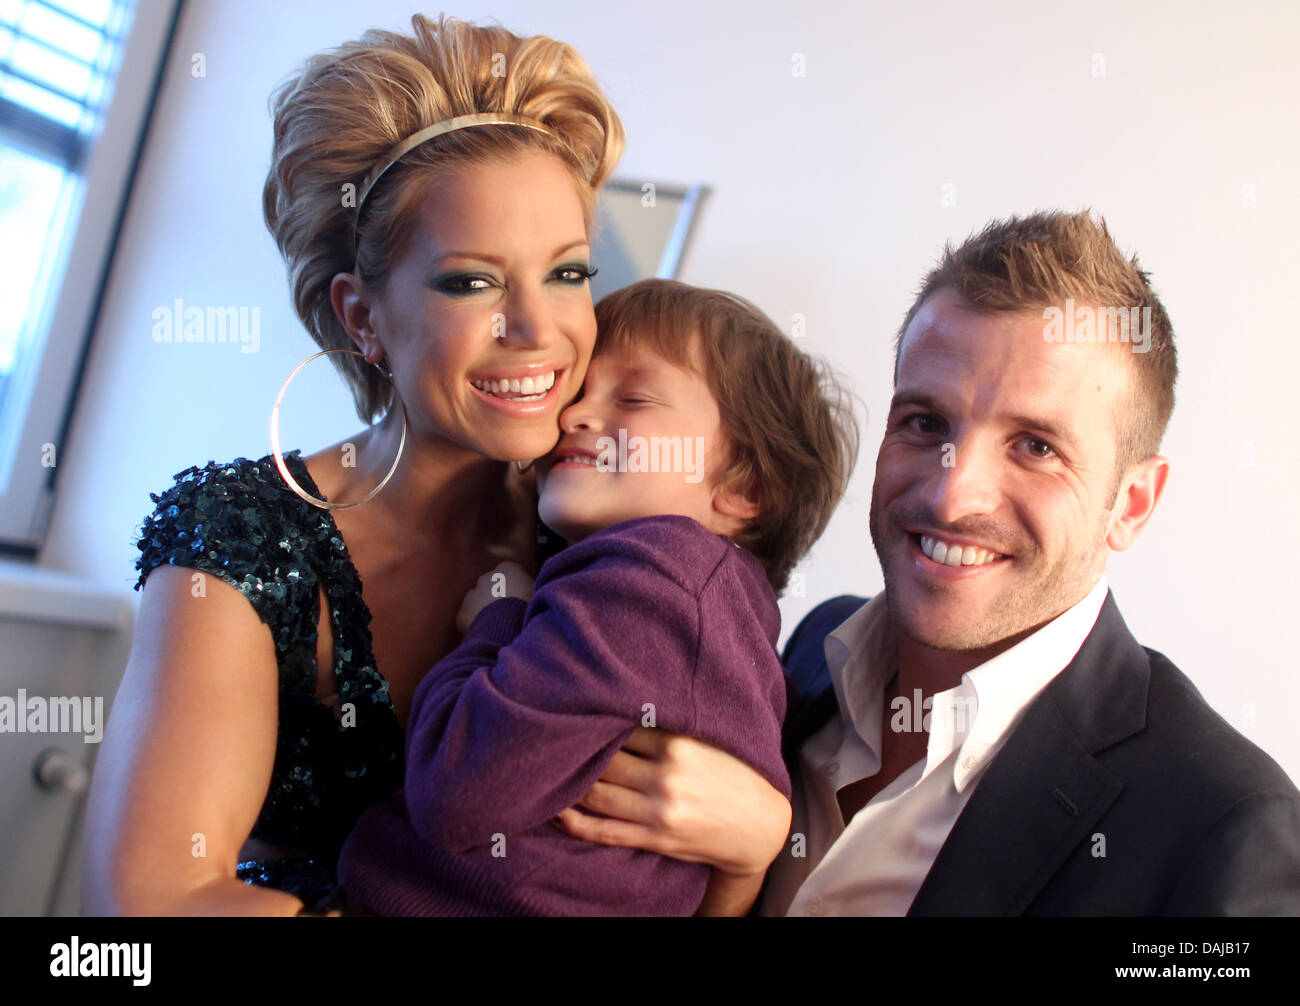 Dutch soccer player Rafael van der Vaart visits his wife Sylvie with his  son Damian at the Coloneum in Cologne, Germany, 30 March 2011. Sylvie van  der Vaart is TV presenter for